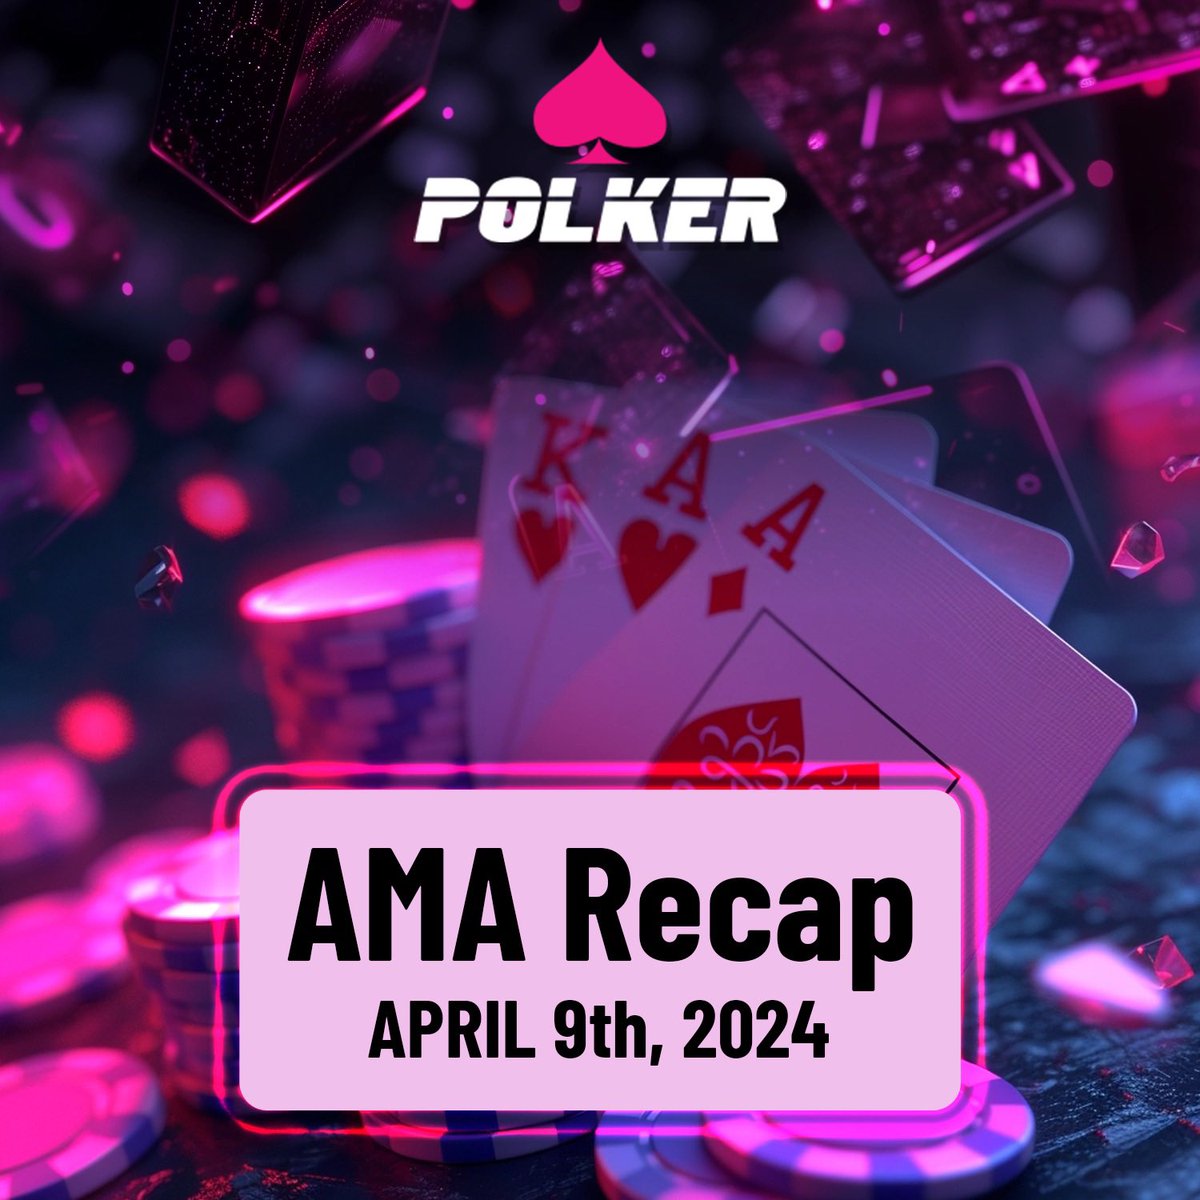 ♠️ ♥️ ♣️♦️POLKERCREW ♠️ ♥️♣️♦️ 🔔AMA Recap Alert 🔔 Missed our latest Ask Me Anything session? 😟 Don’t fret! You can check out the recap now and be in the know! Read the latest insights shared during the AMA. 👨‍💻 polker-pkr.medium.com/polker-ama-rec… Got more questions? Send them in…